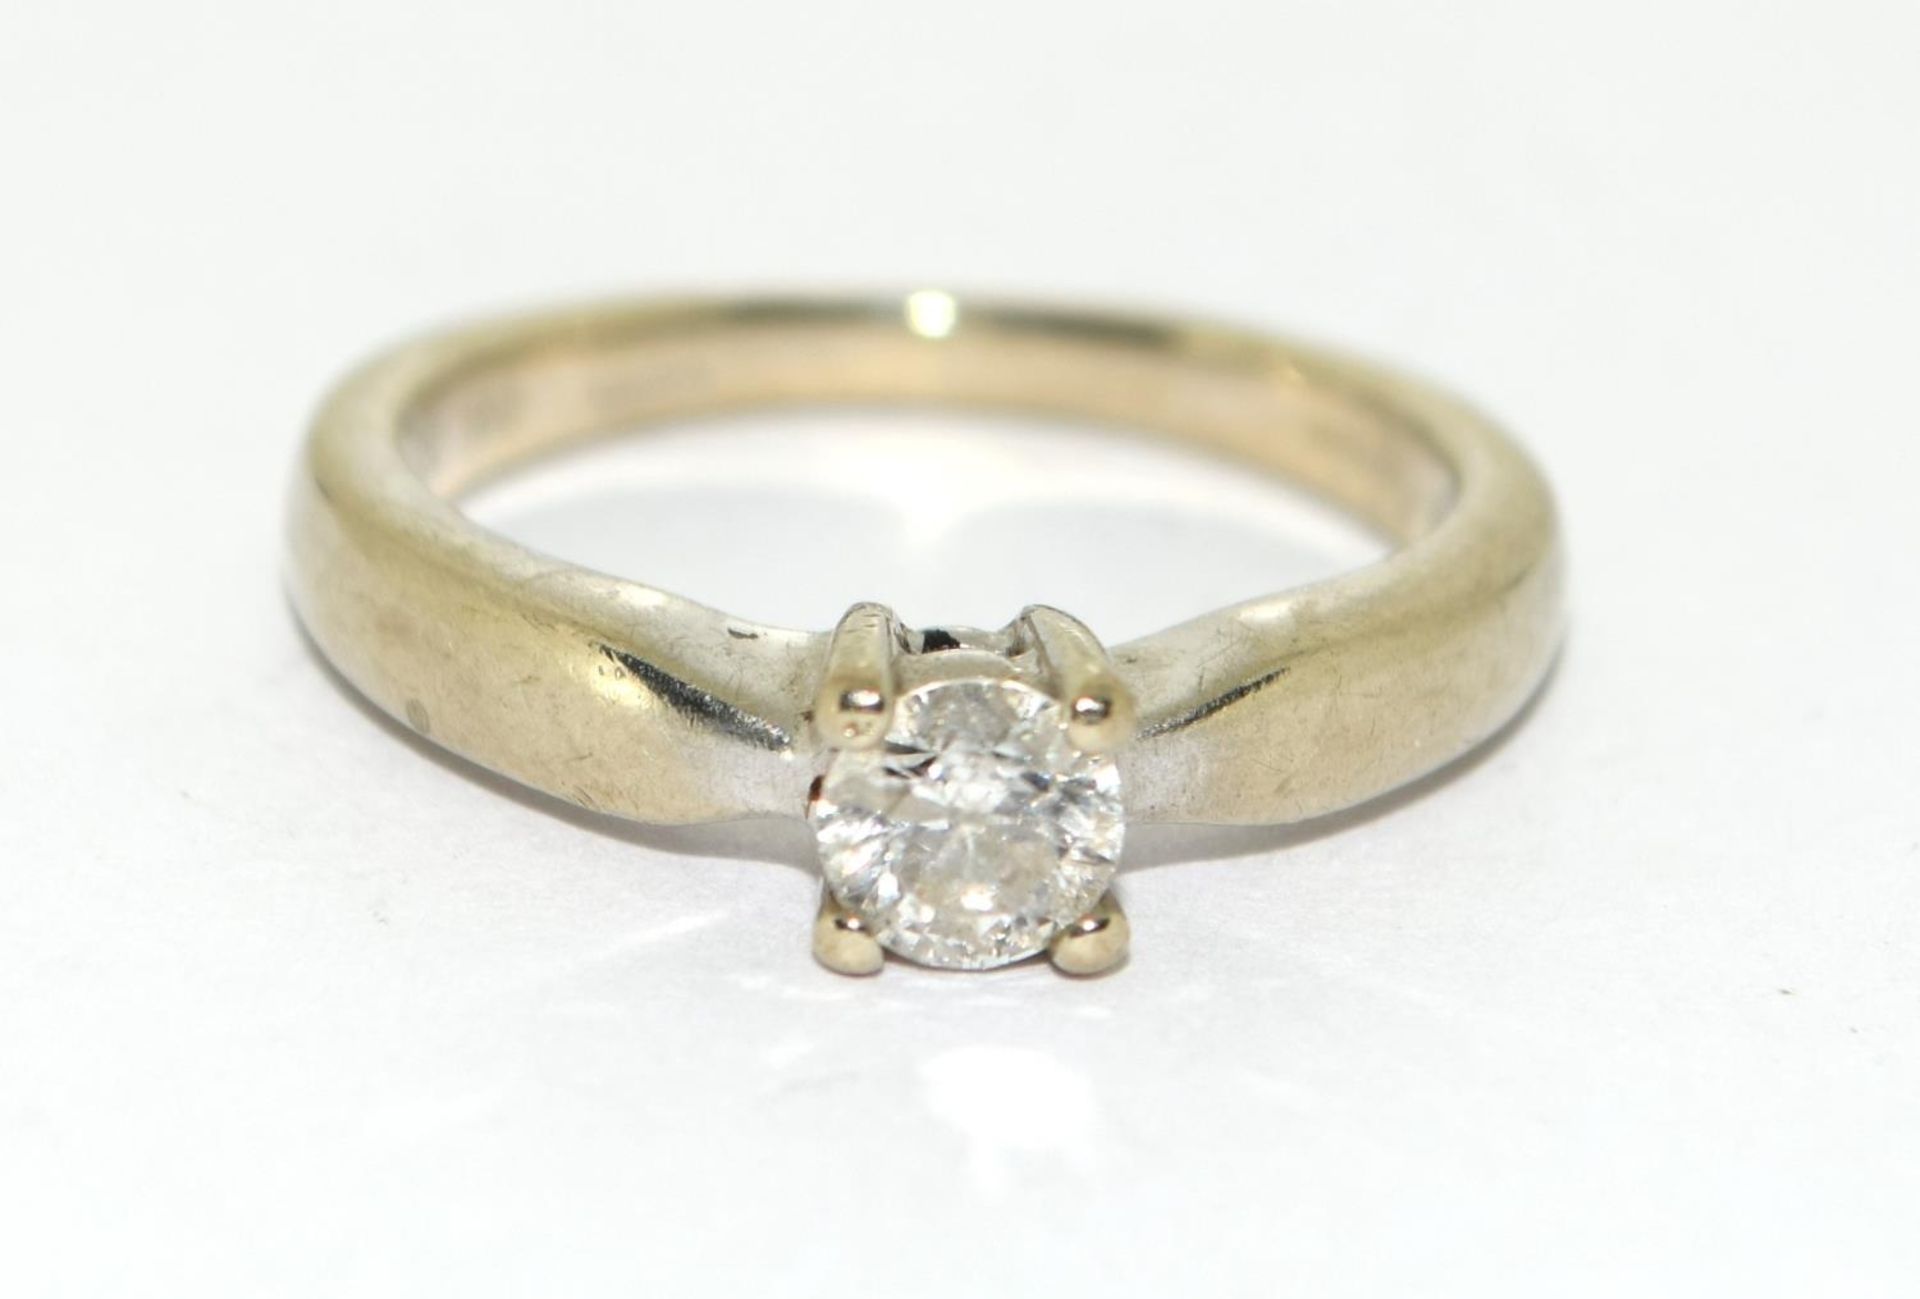 Diamond solitaire approx 0.33points 9ct gold 2.8g ring size M - Image 5 of 5